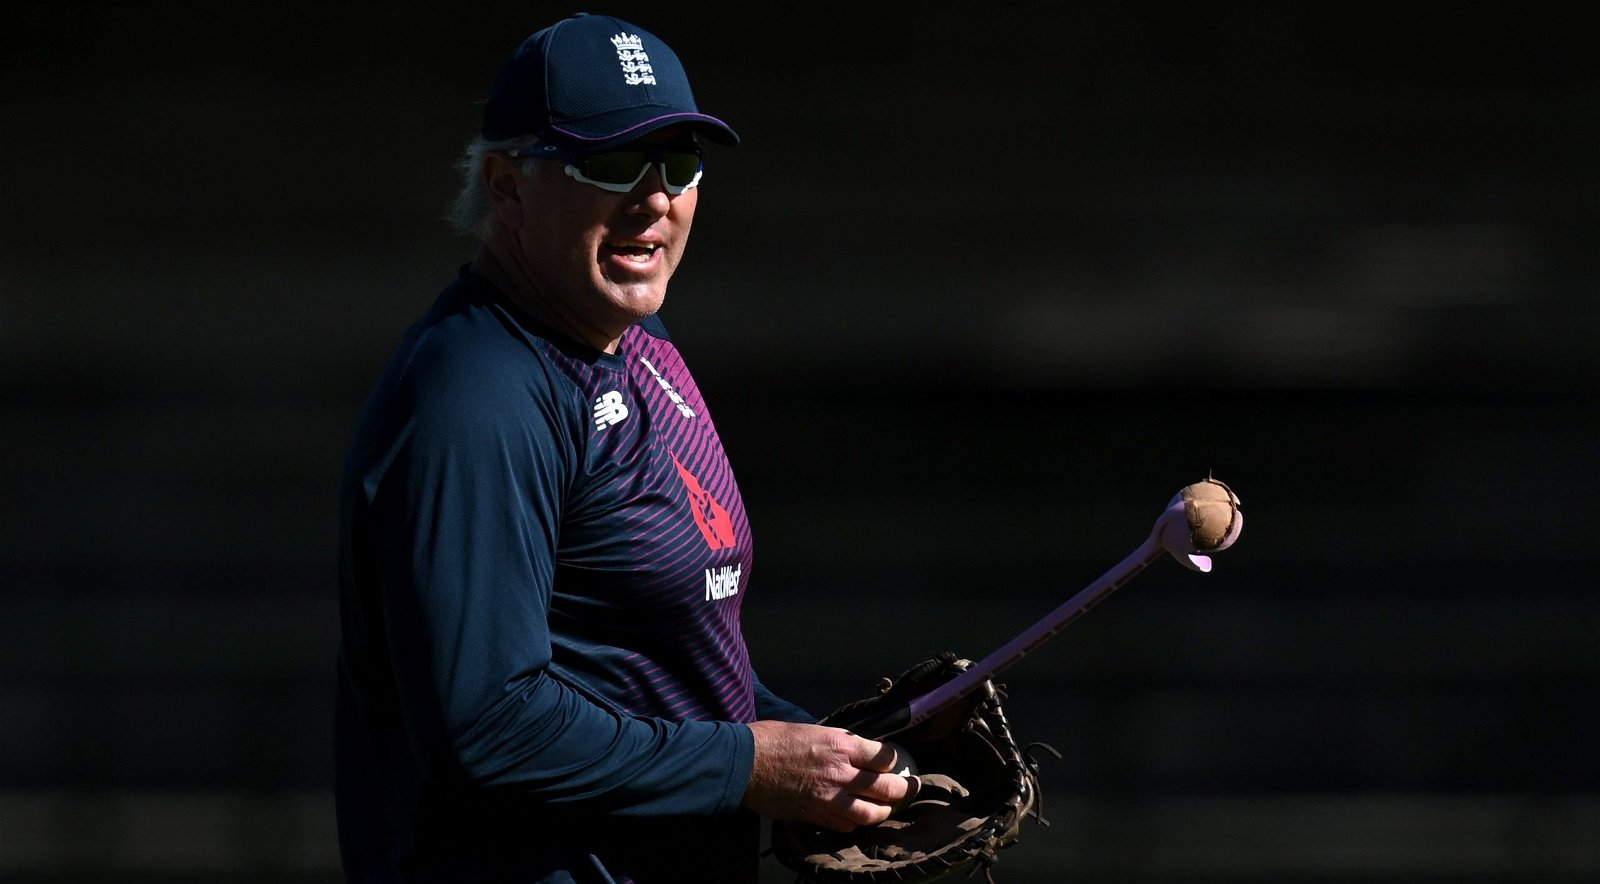 Chris Silverwood: Ex-England head coach takes charge of Sri Lanka on  two-year contract, Cricket News